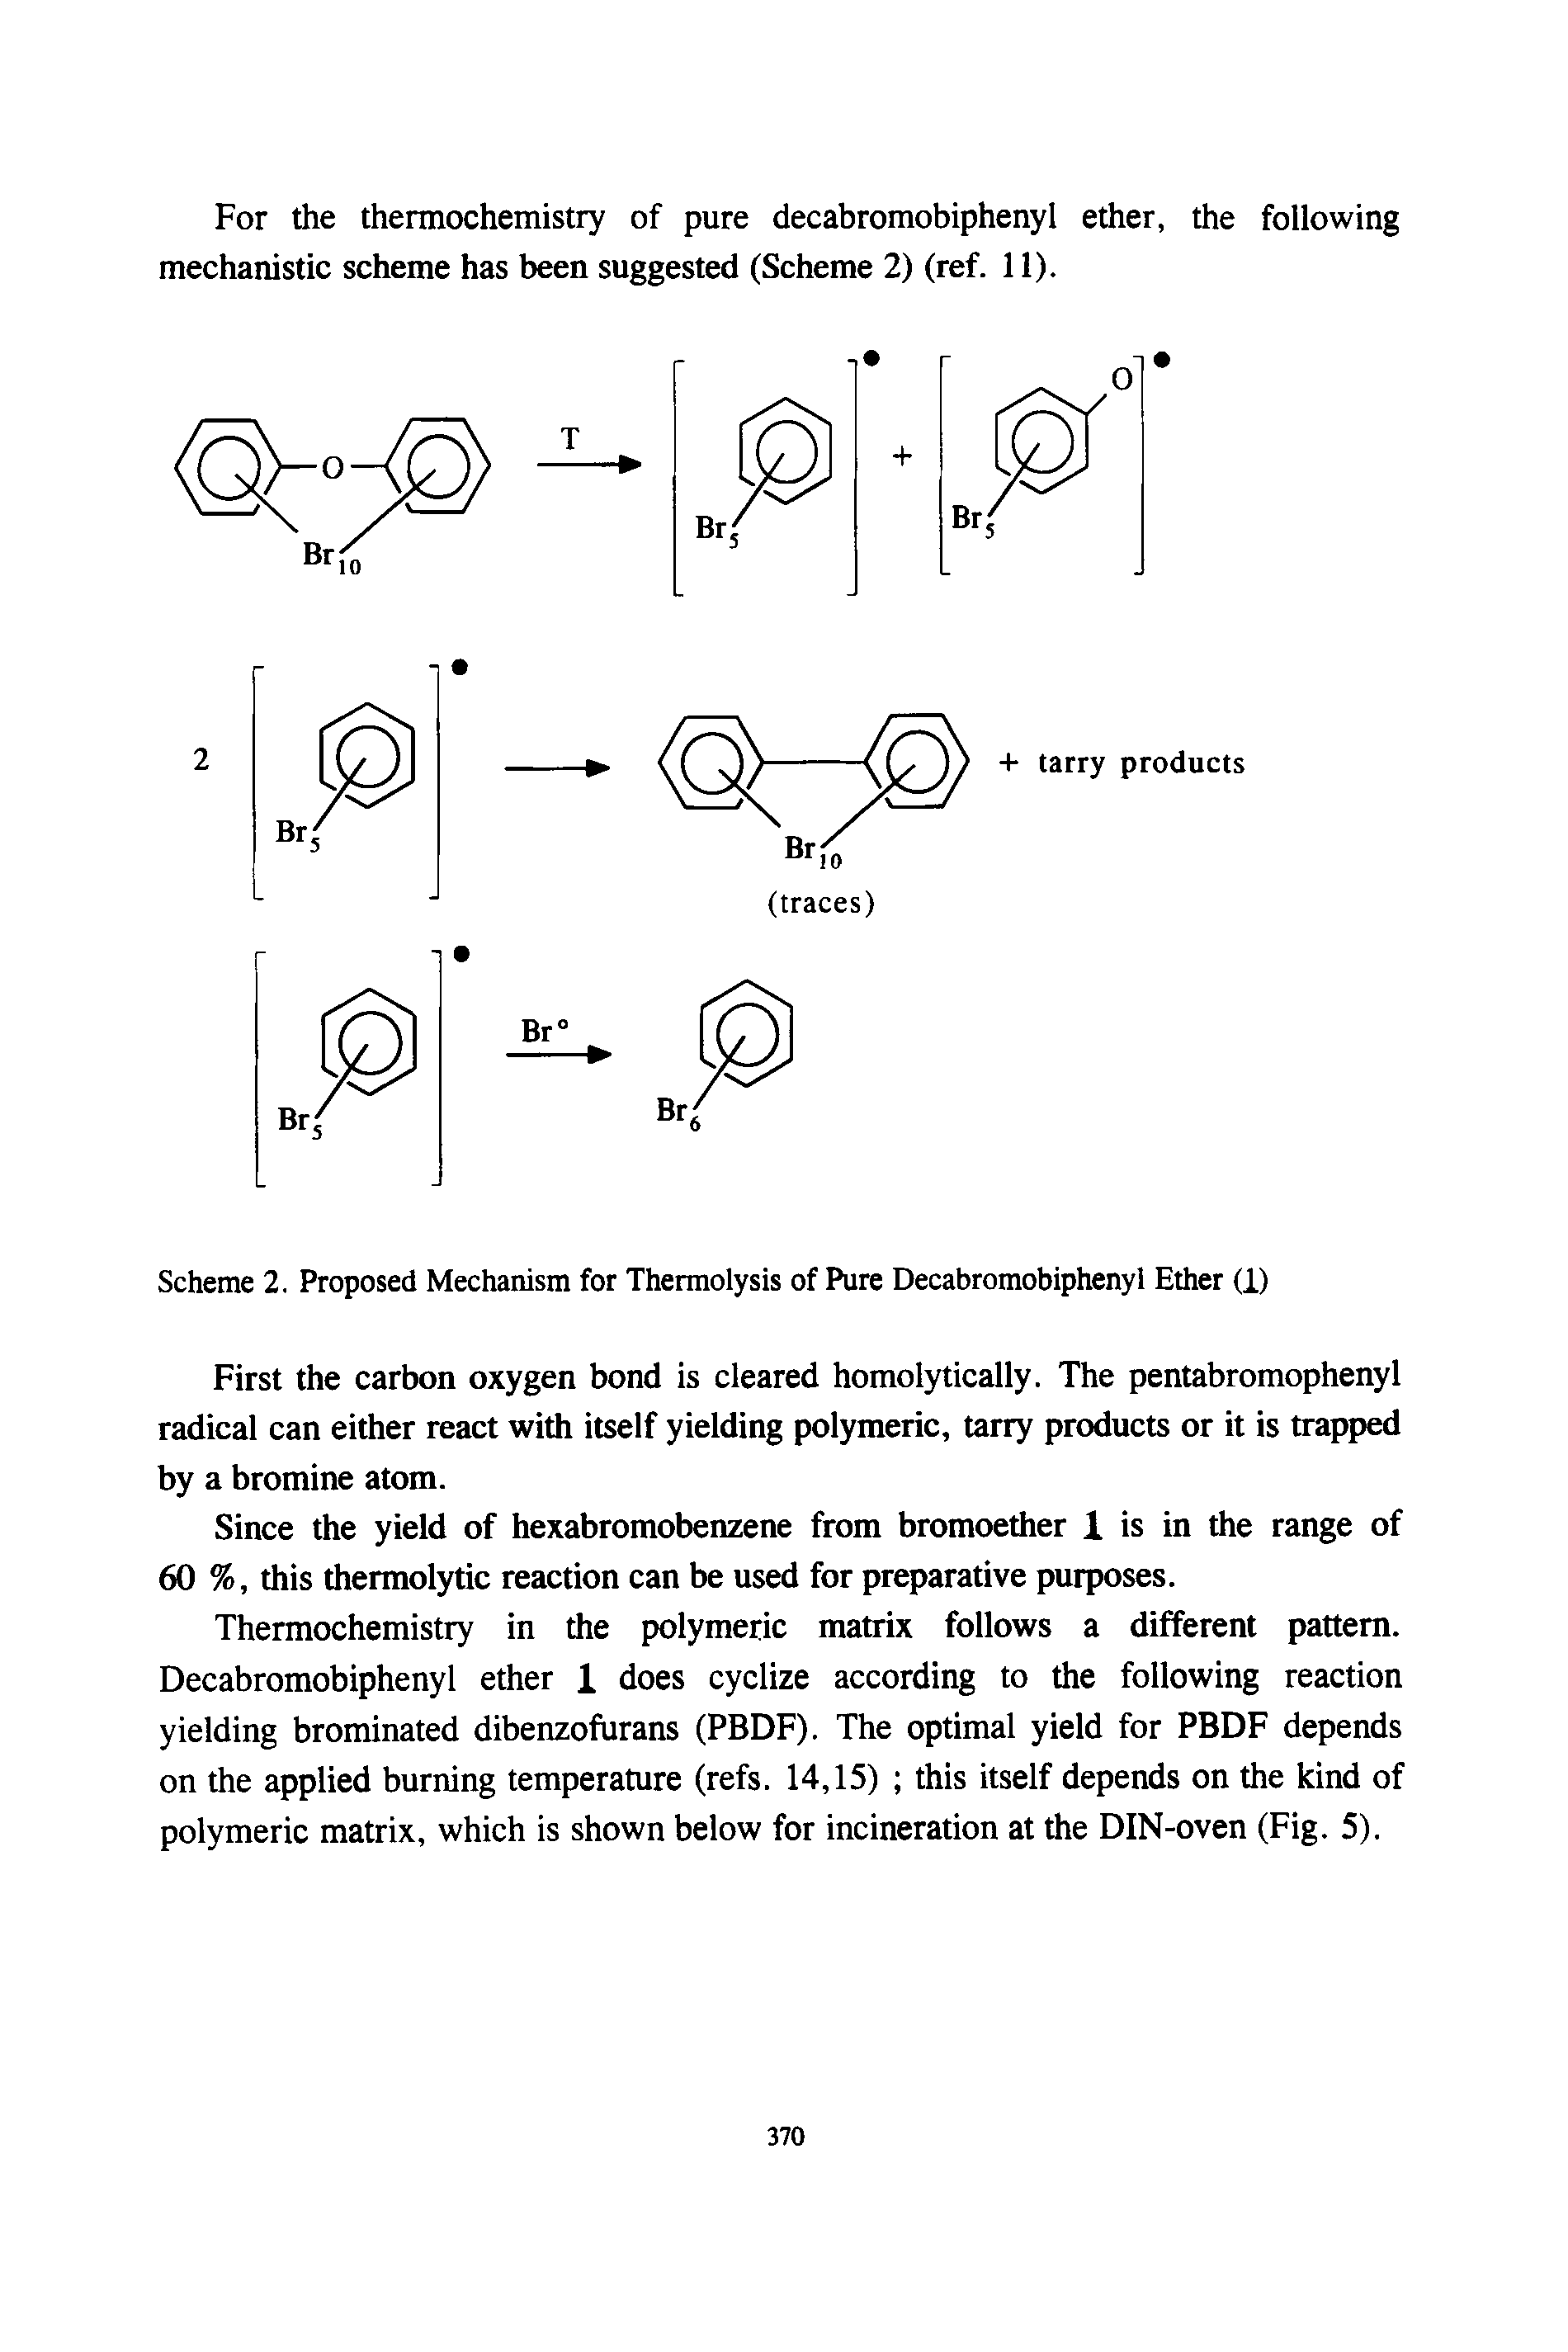 Scheme 2. Proposed Mechanism for Thermolysis of Pure Decabromobiphenyl Ether (1)...